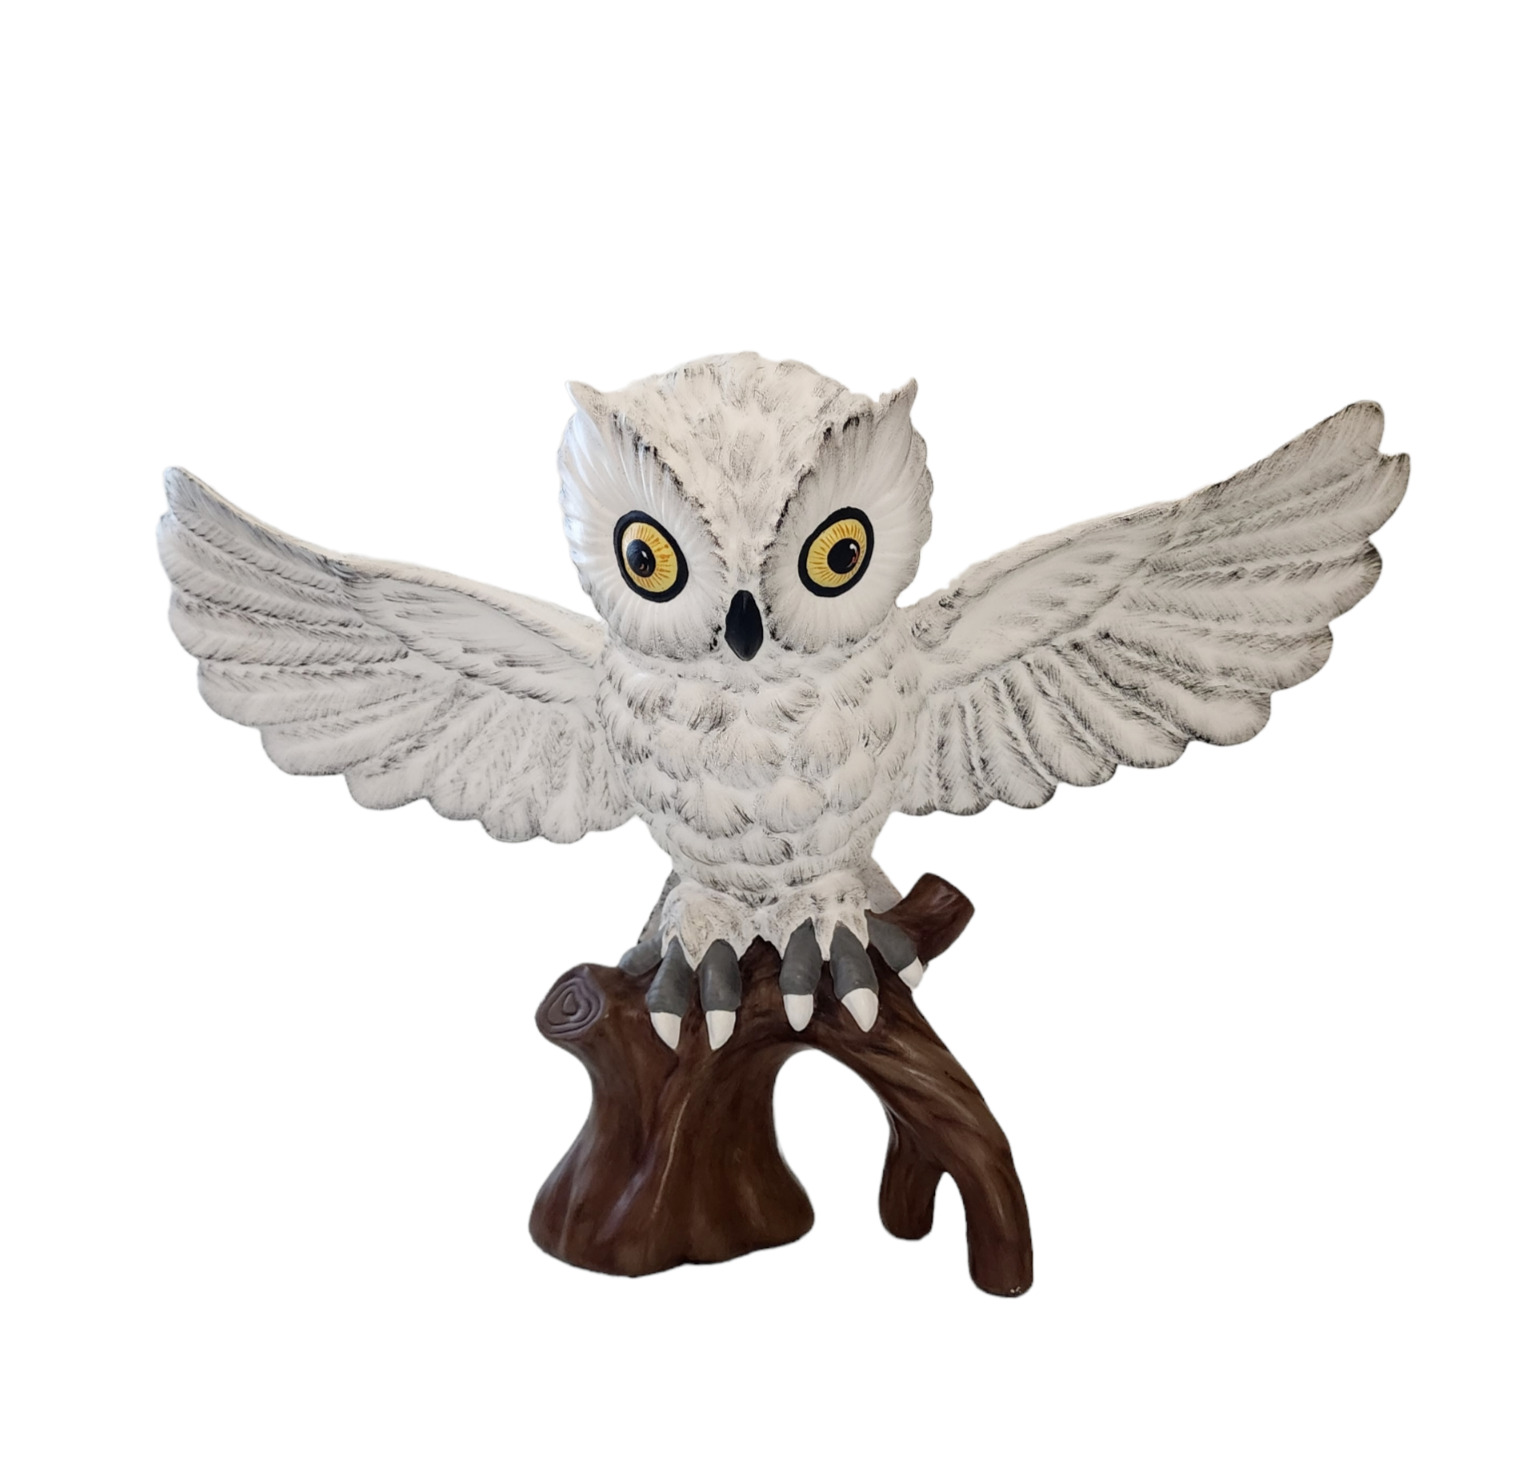 Vintage White Owl Statue Large Figurine Spread Wings Wood Perch Ceramic 1975